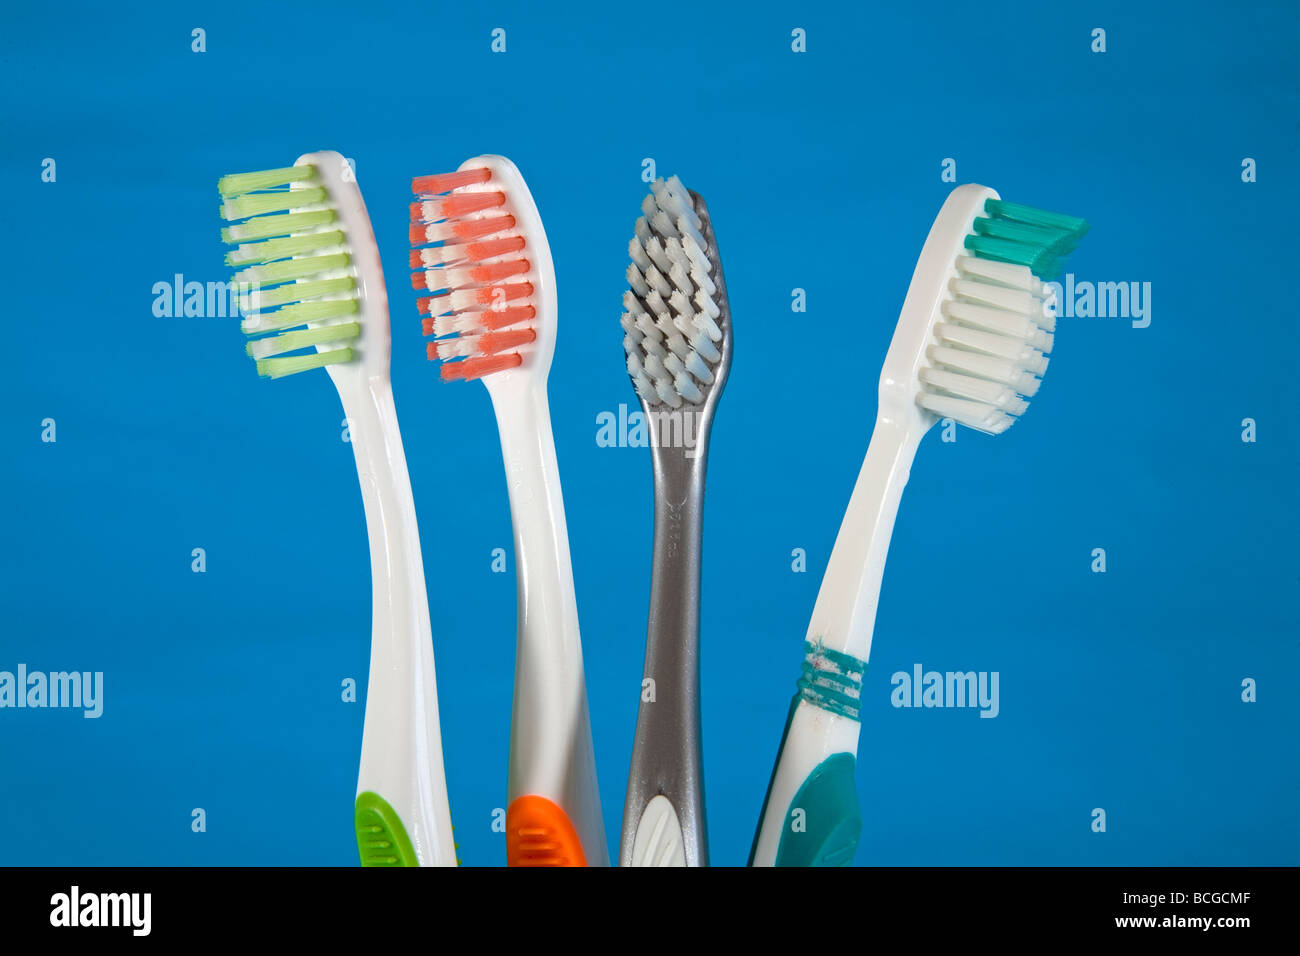 Toothbrushes in a cup. Stock Photo